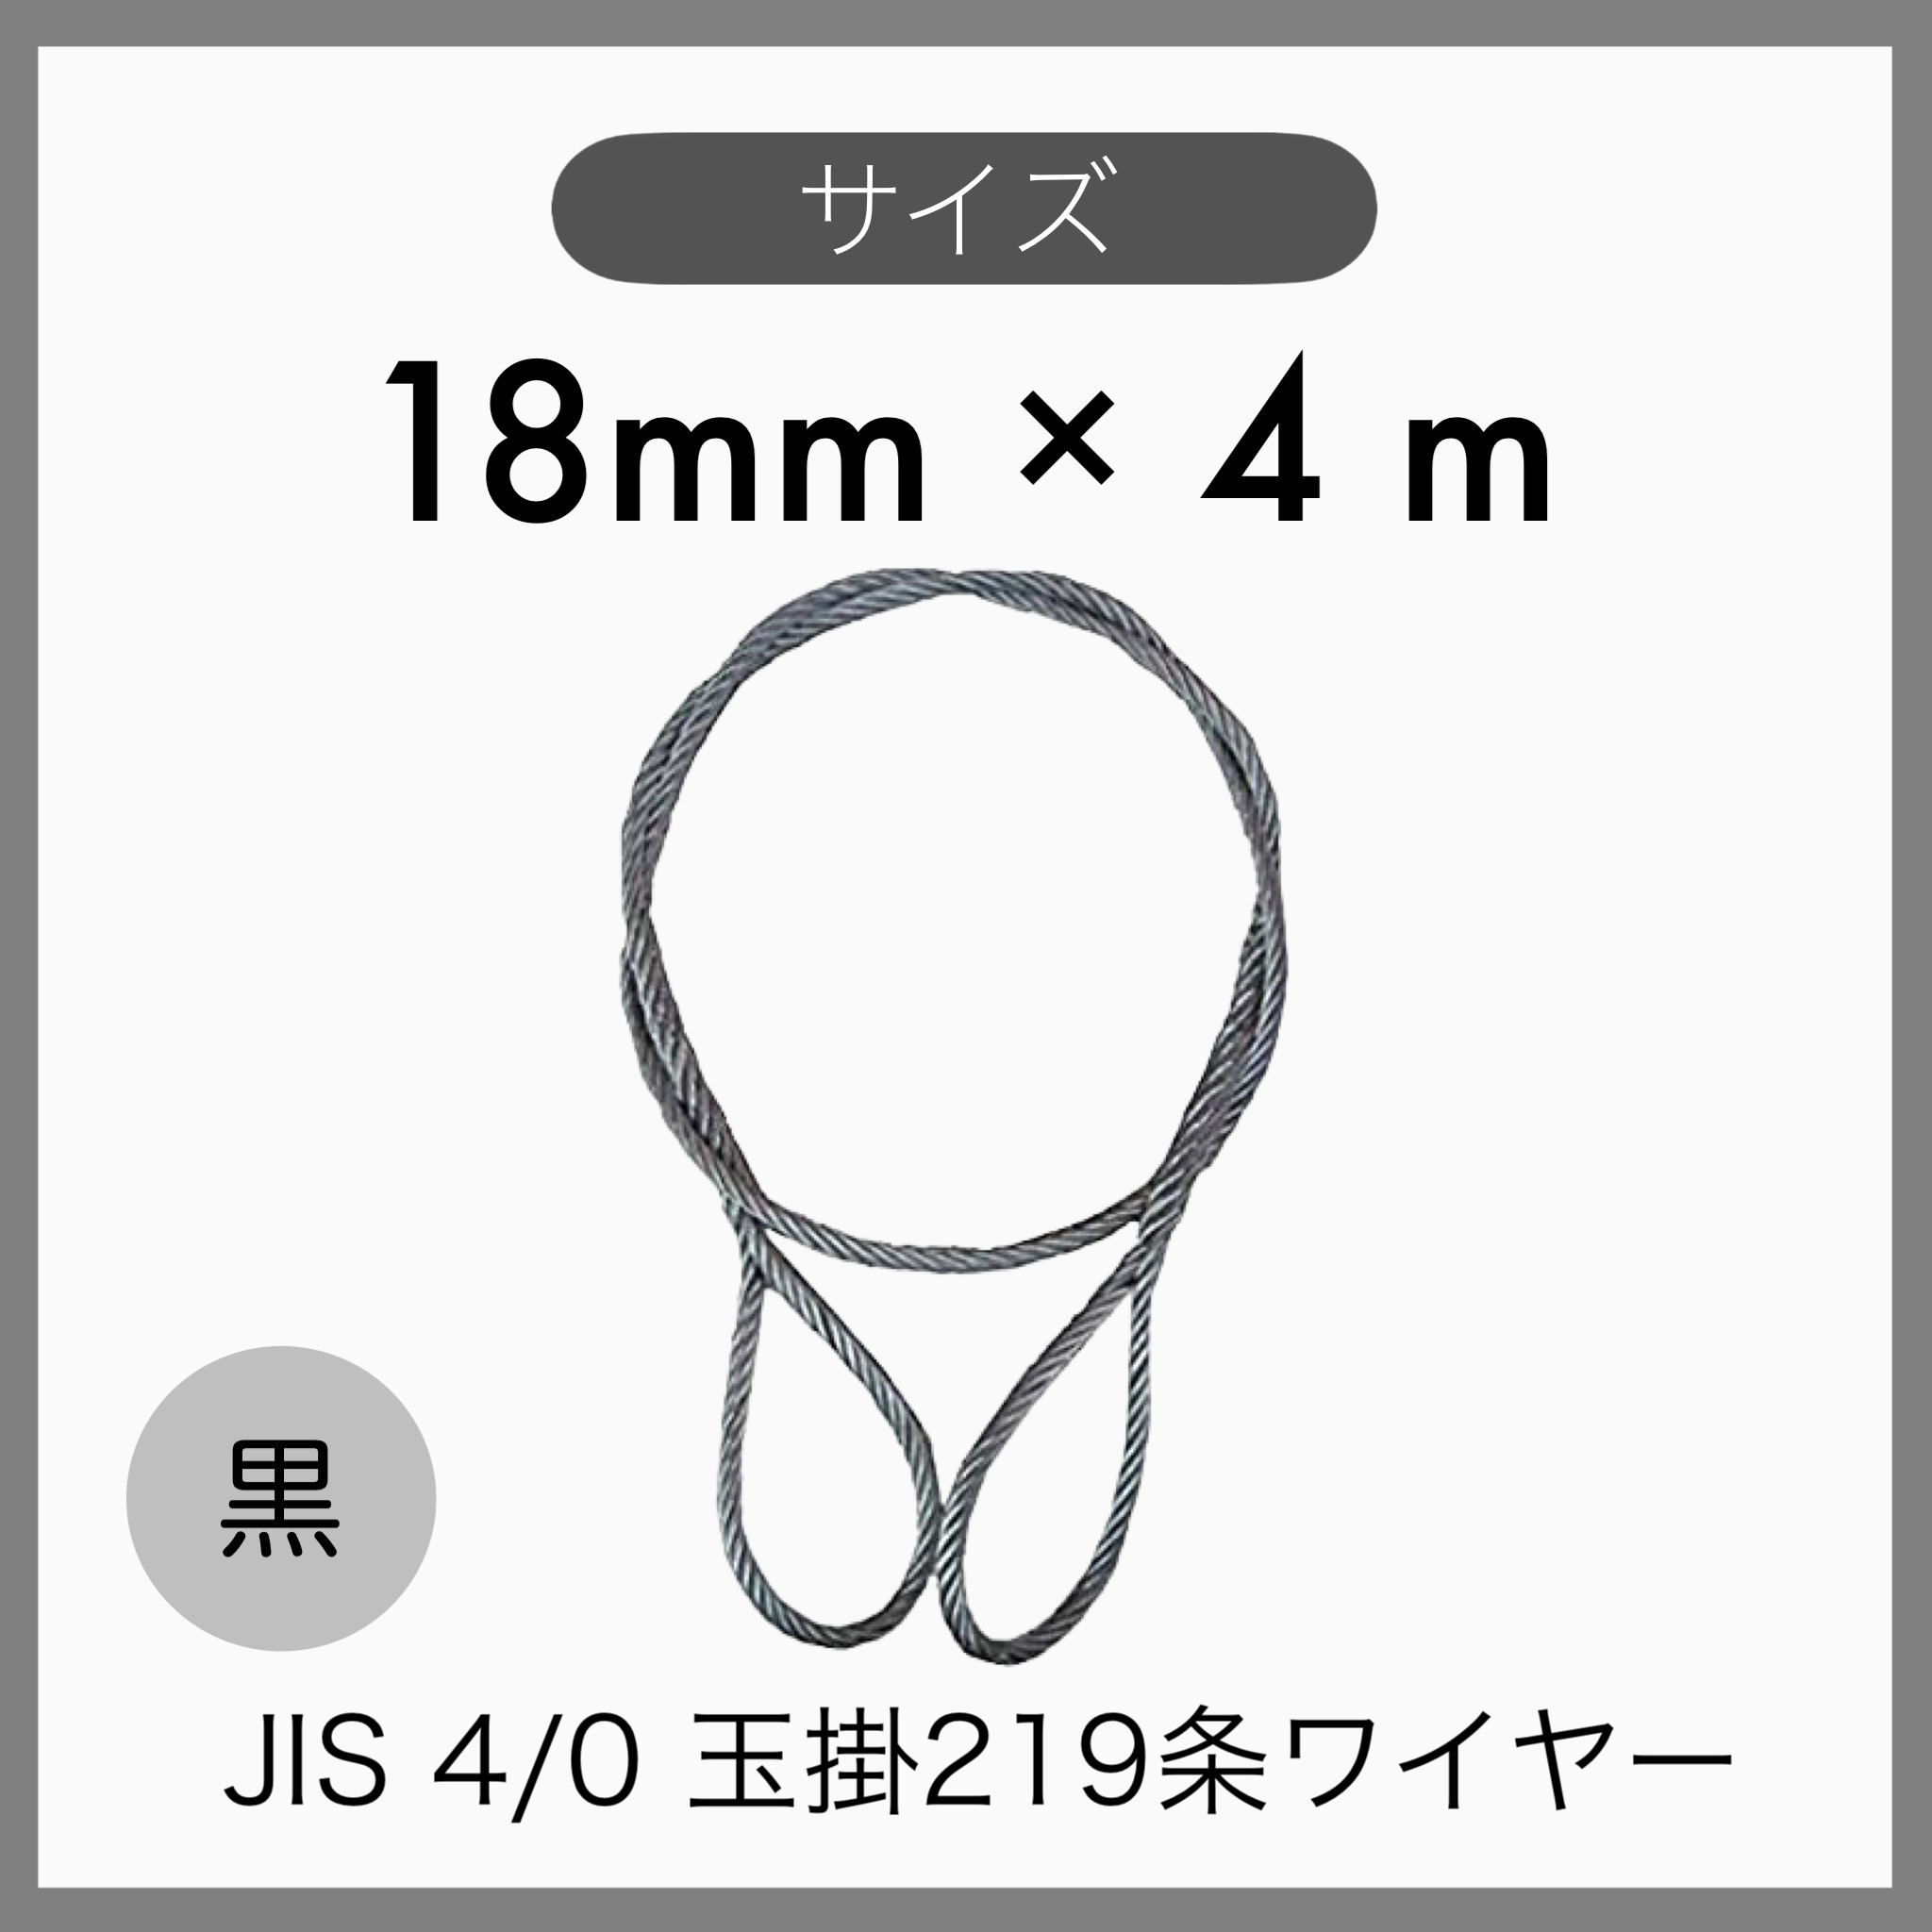 5 pcs set JIS O/O black sphere .. wire sphere ..219 article wire knitting imported goods 18mm×4m